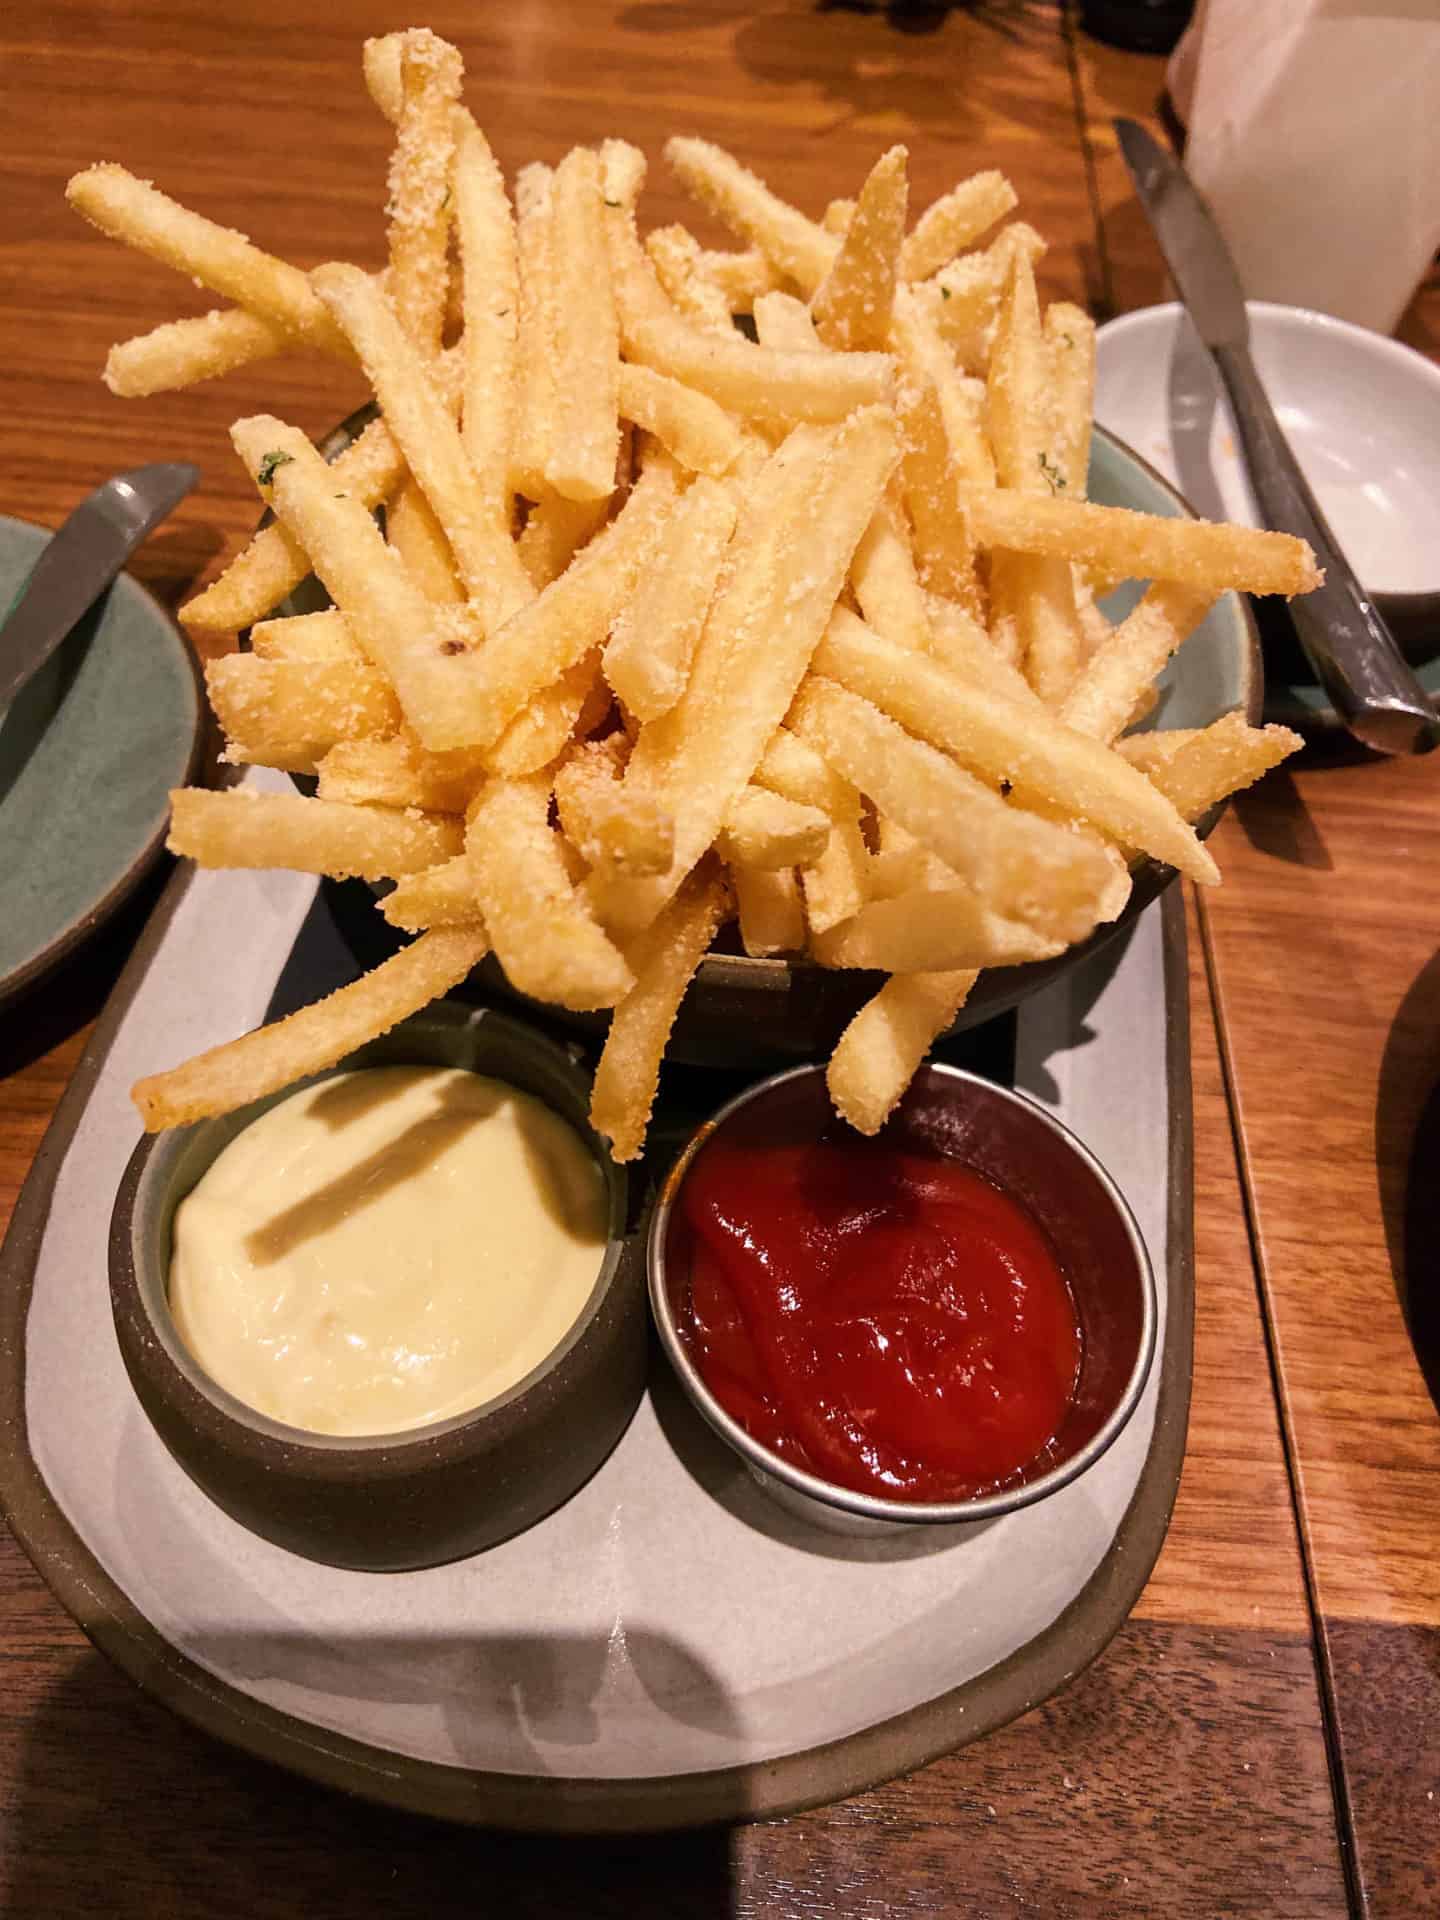 French fries mound high with catsup and mayonaise nearby at the Barn restaurant in the Williams Inn.